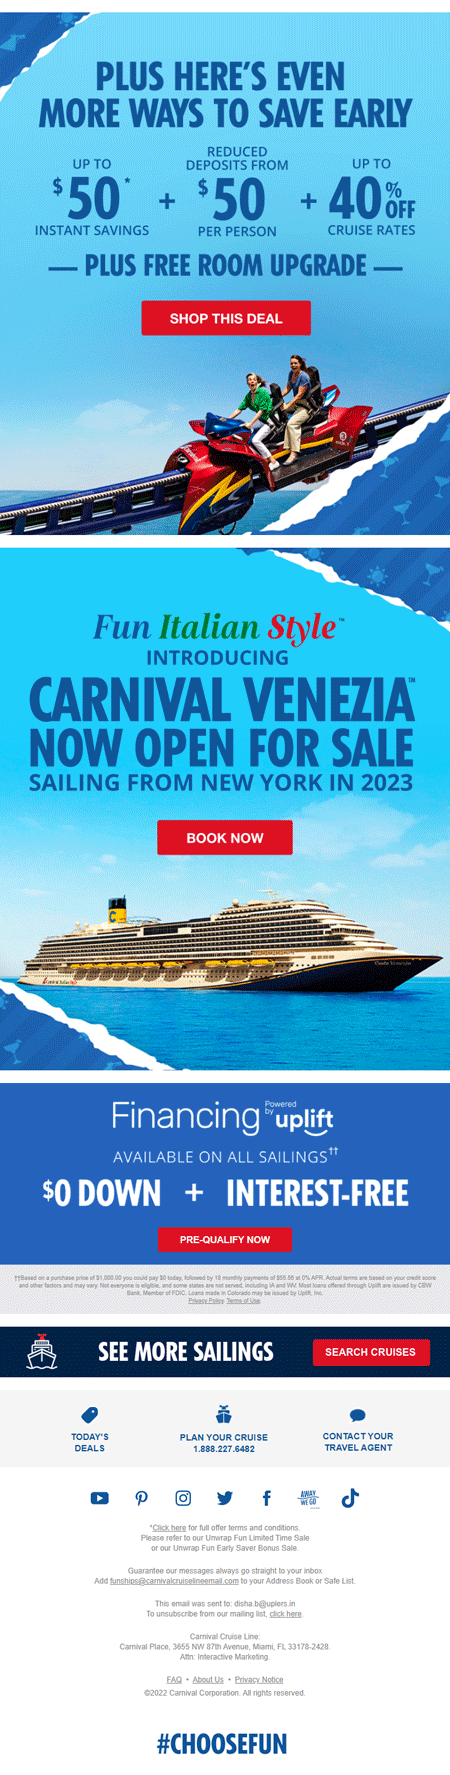 Carnival- Christmas email